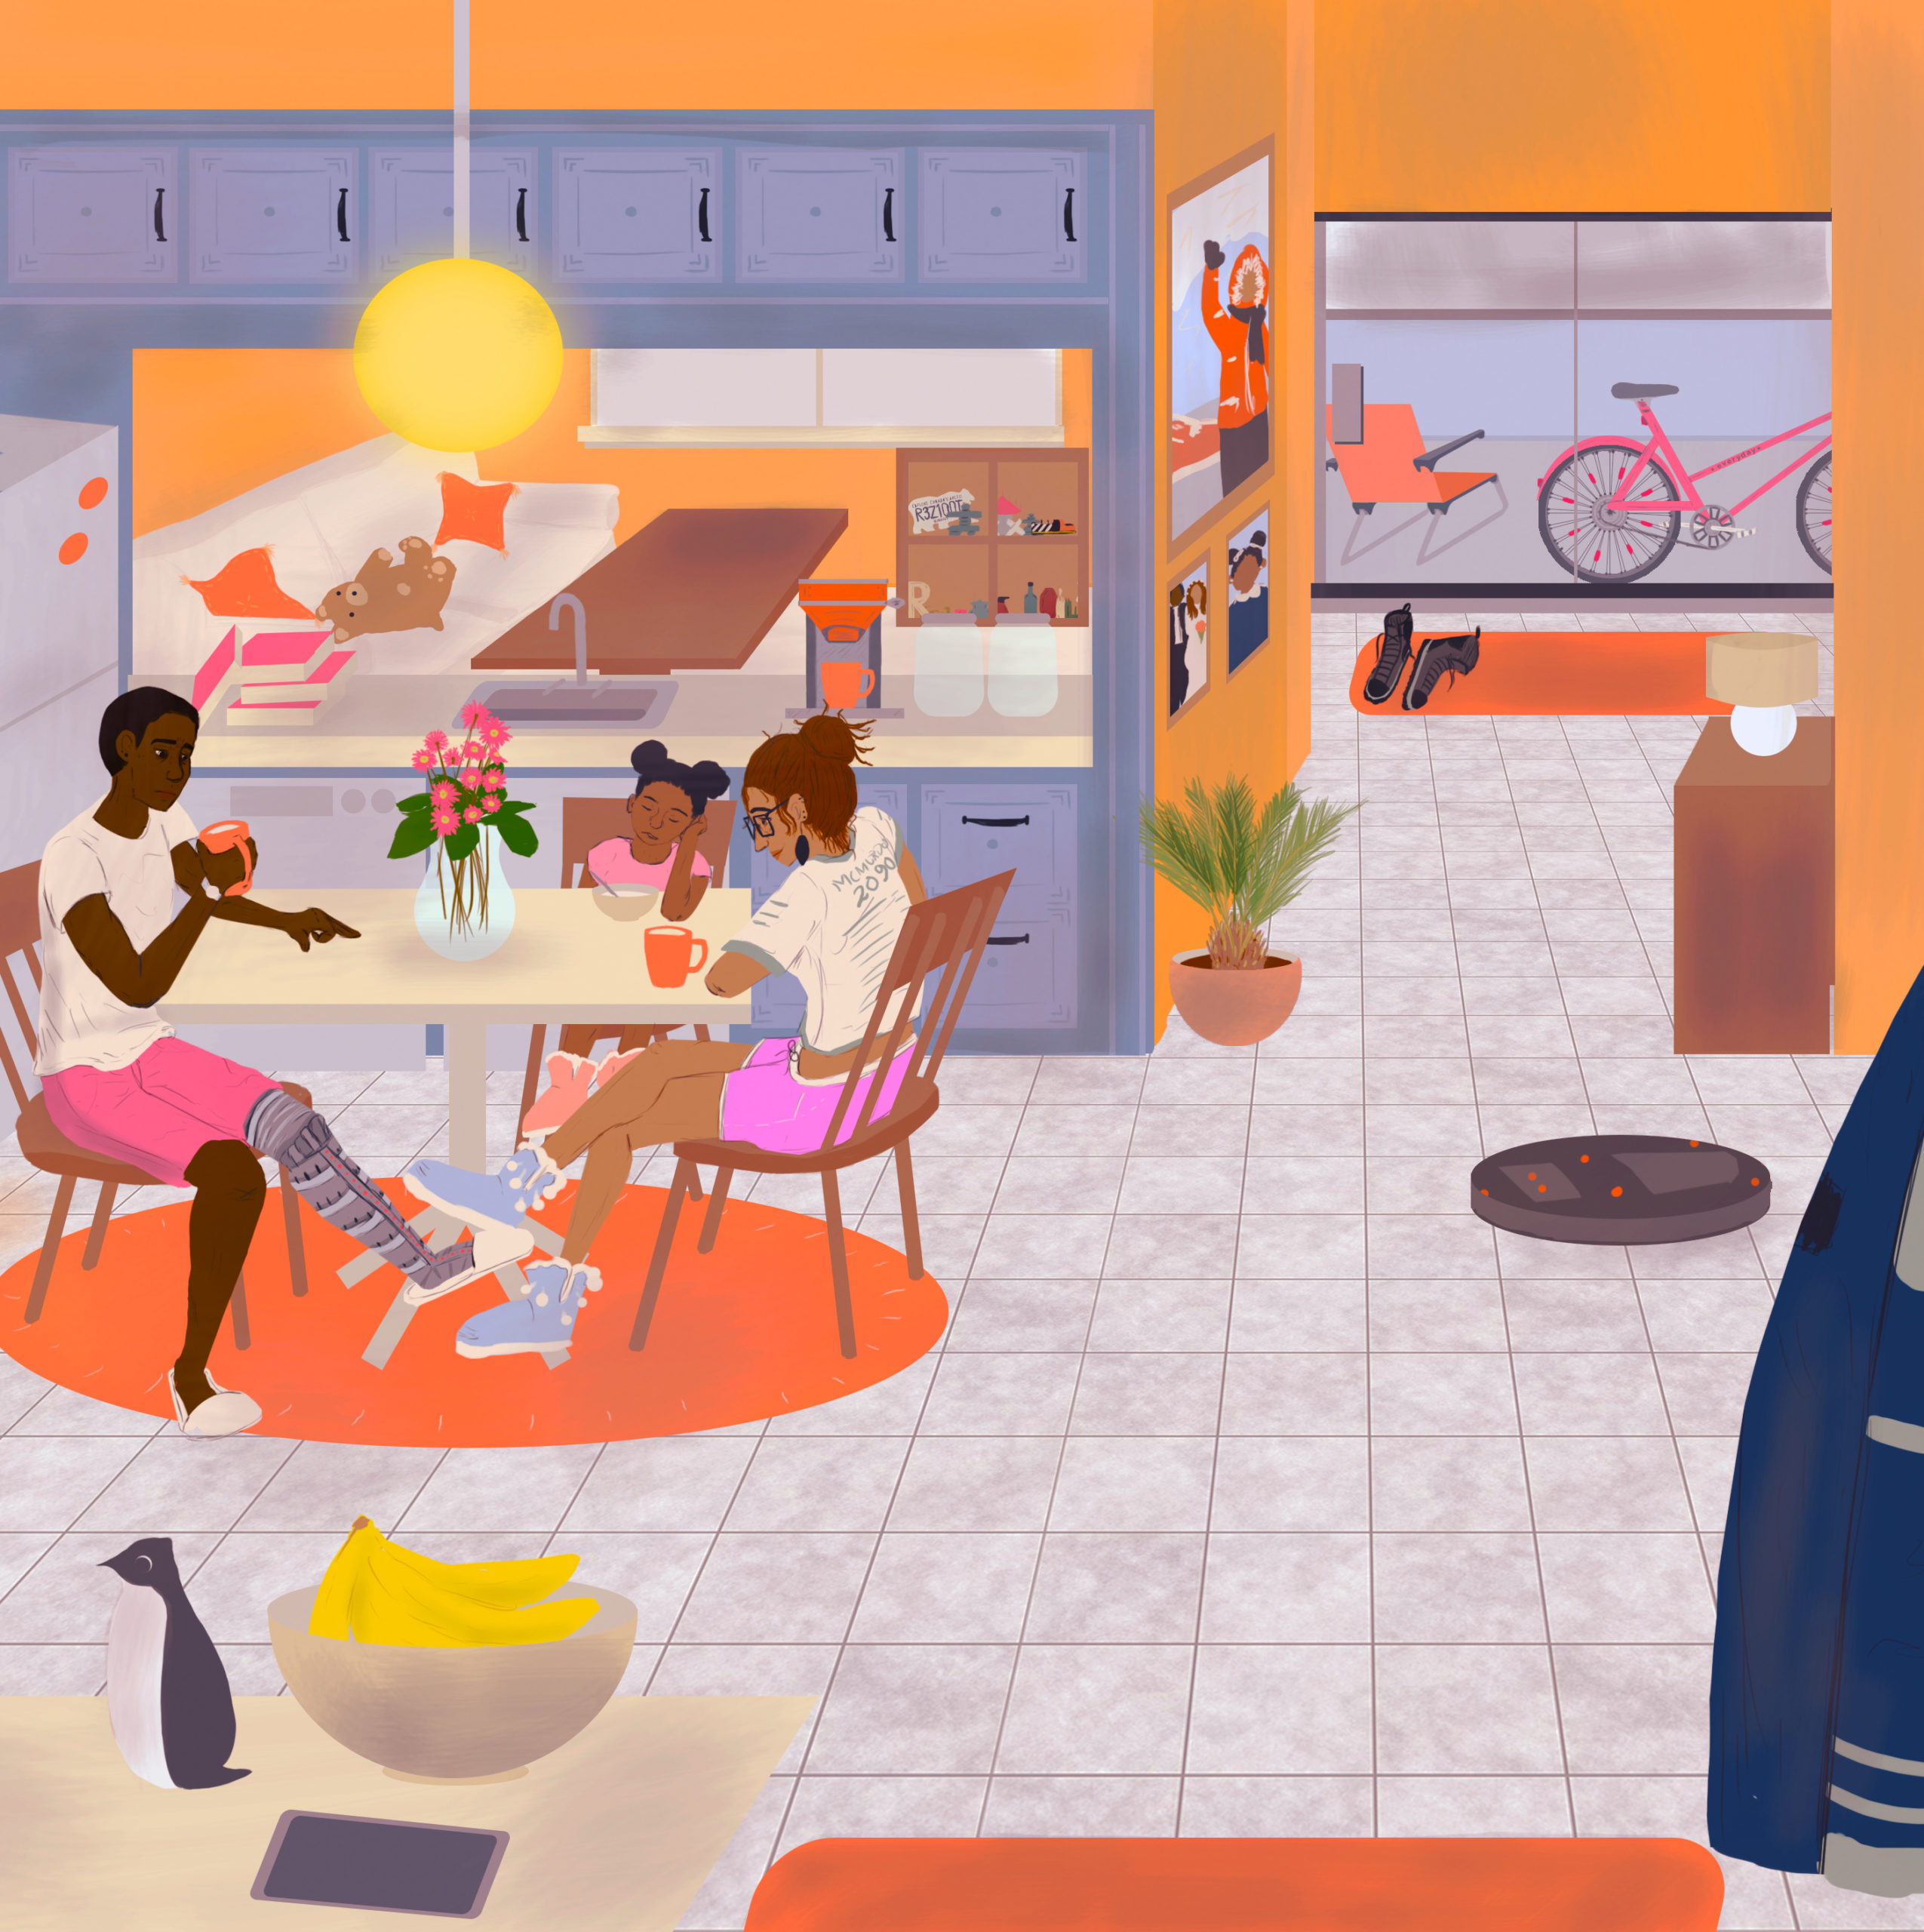 JP's Apartment — the interior of a Resolute apartment, with bright orange walls and pastel colours. A family sits at a kitchen table enjoying breakfast. Trinkets dot the apartment, including a roomba-type robot running along the floor.